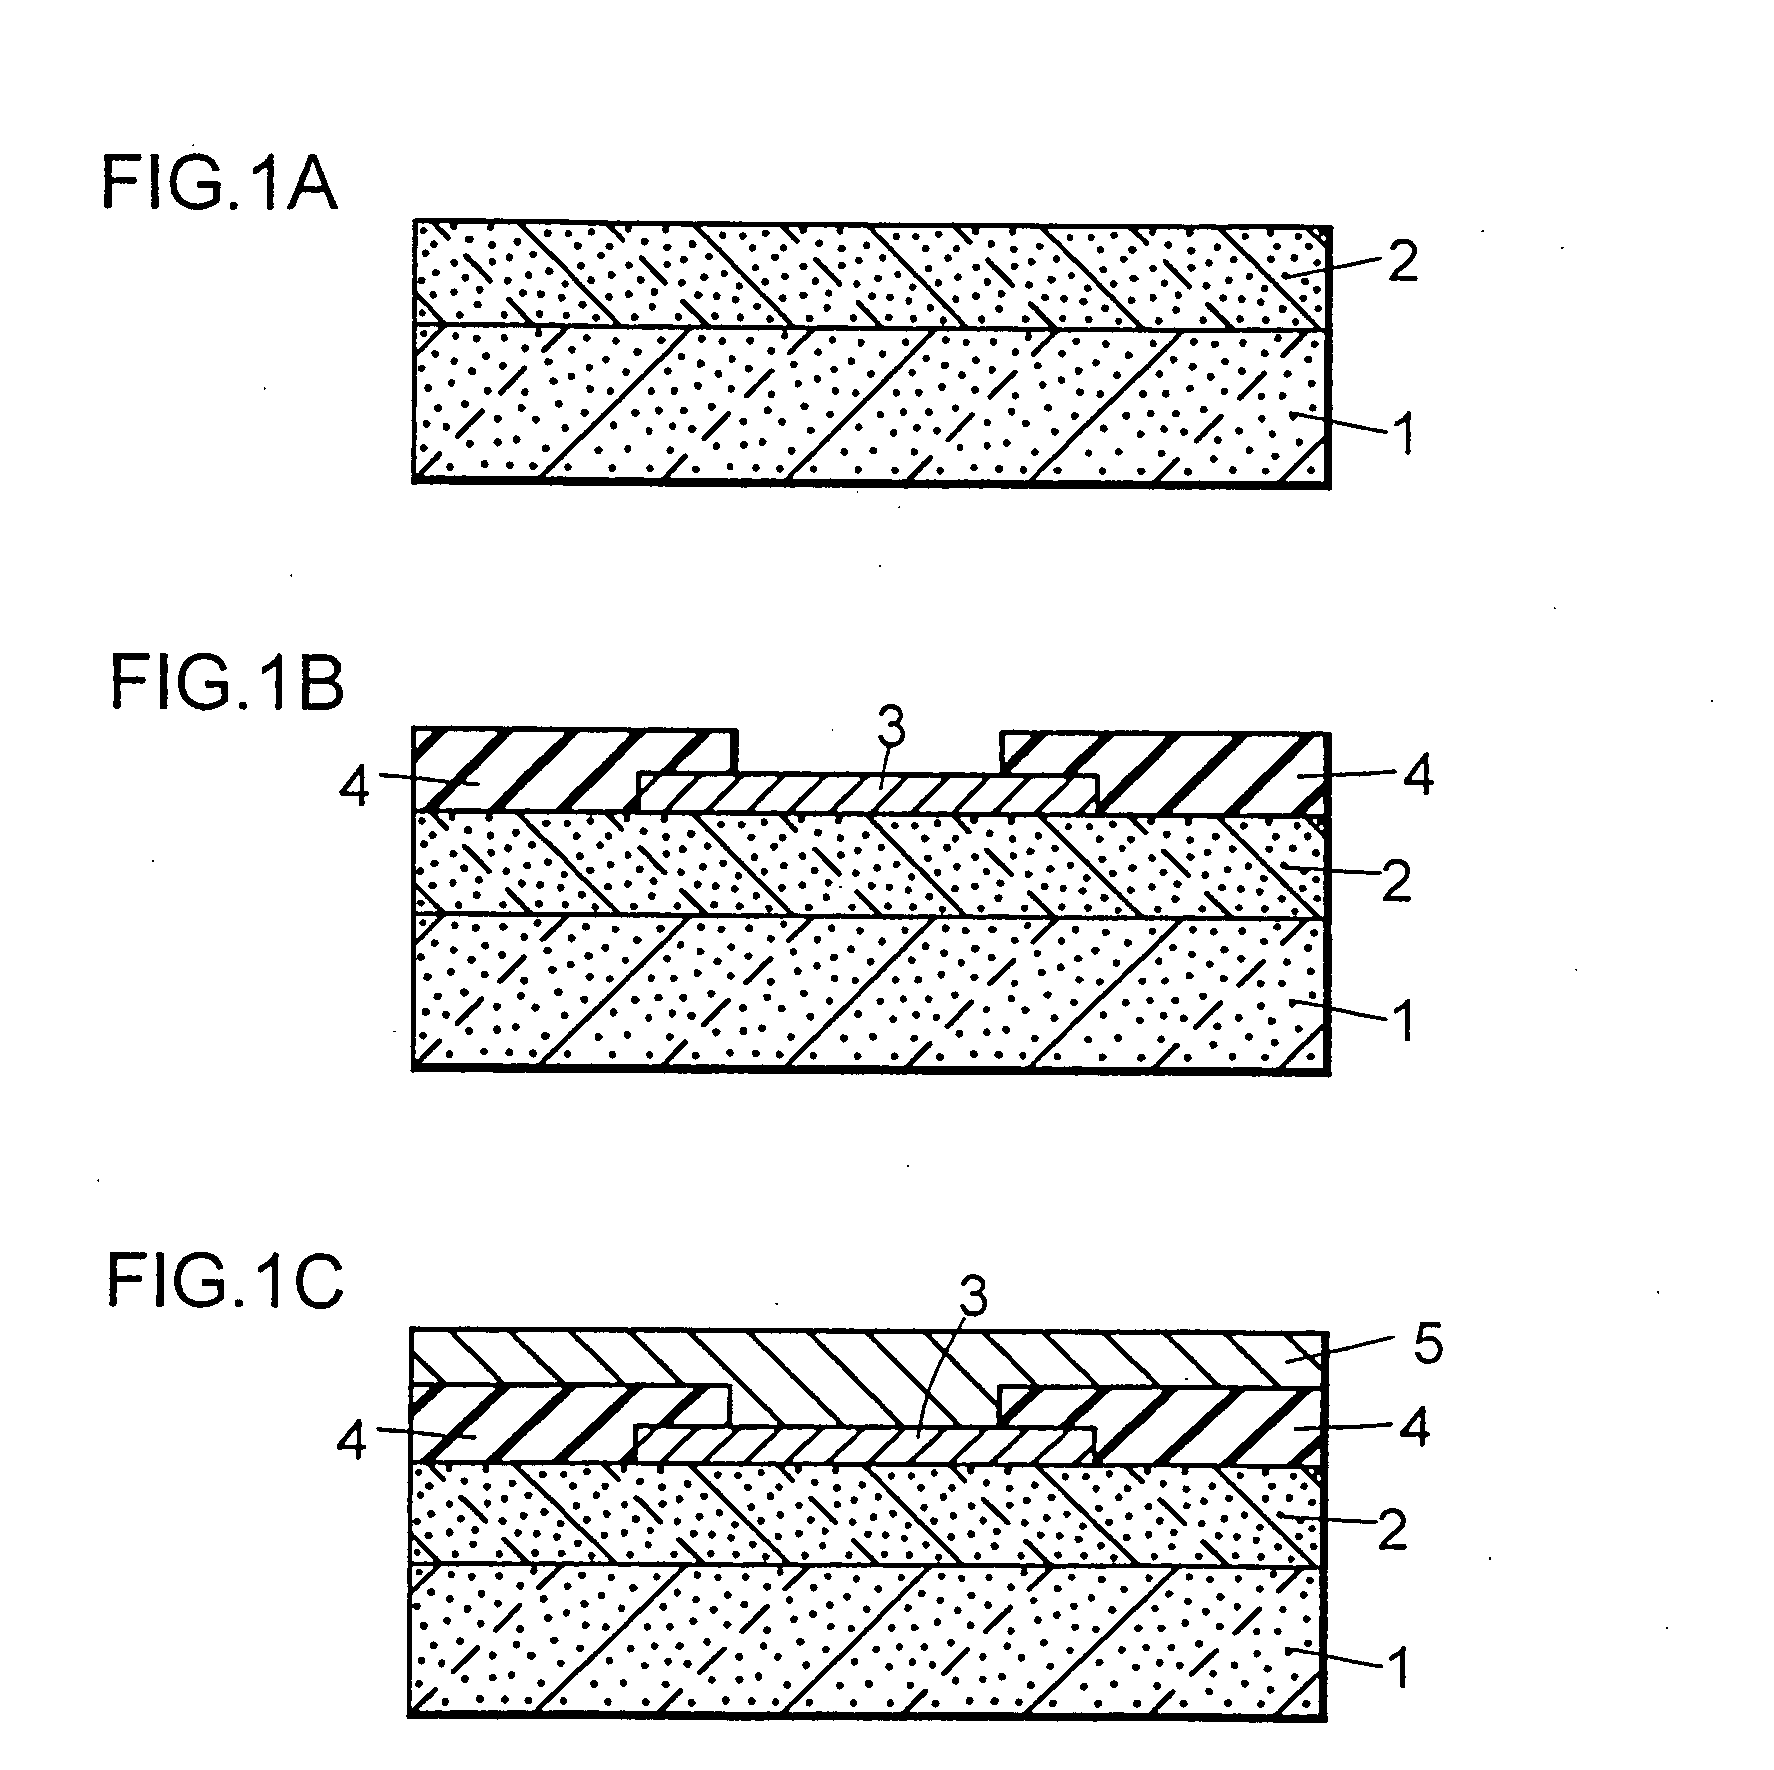 Opposed terminal structure having a nitride semiconductor element